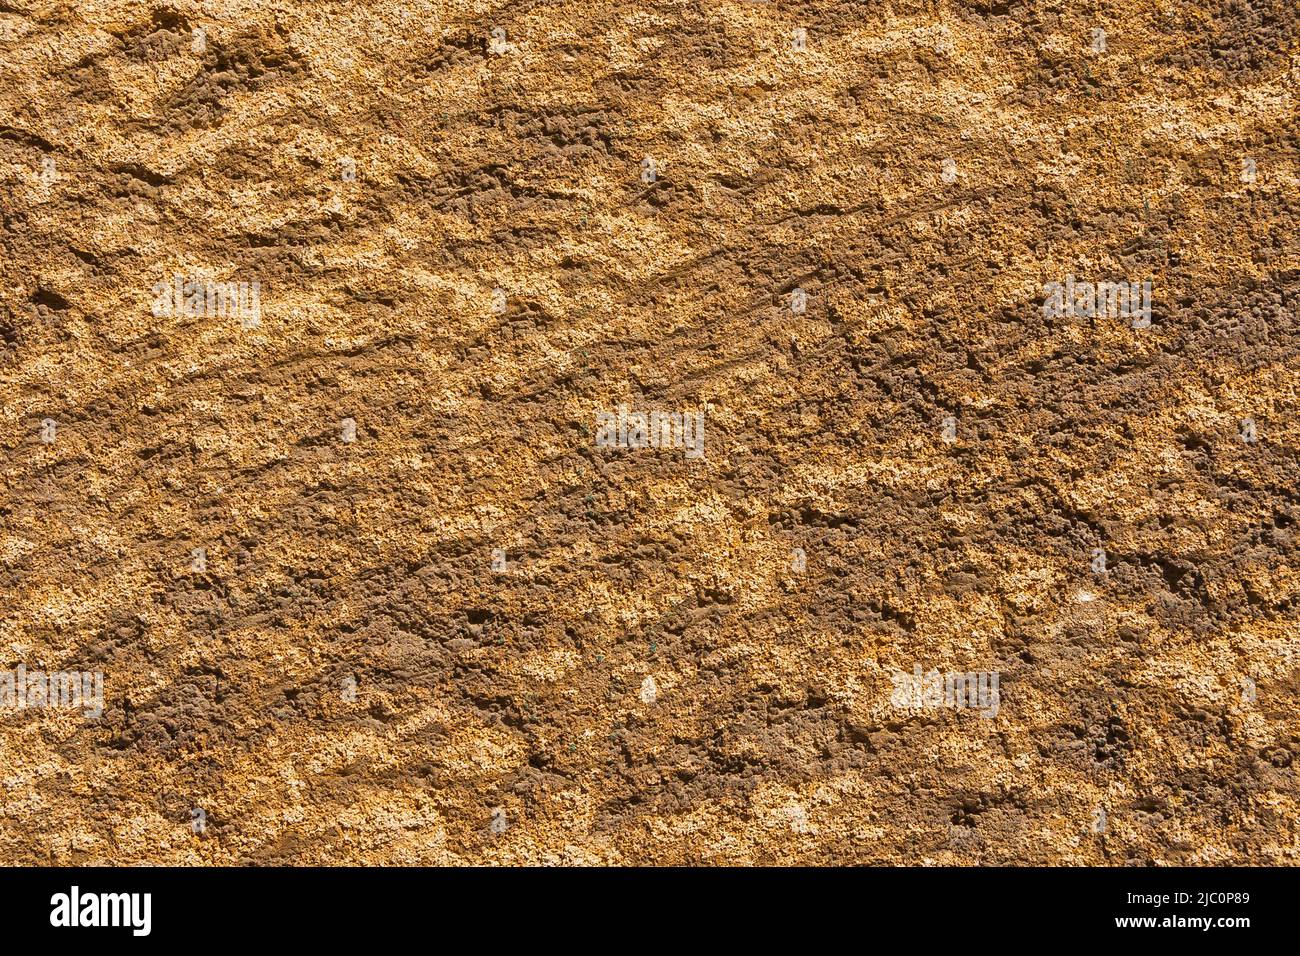 Brownish stone with rough surface as background Stock Photo